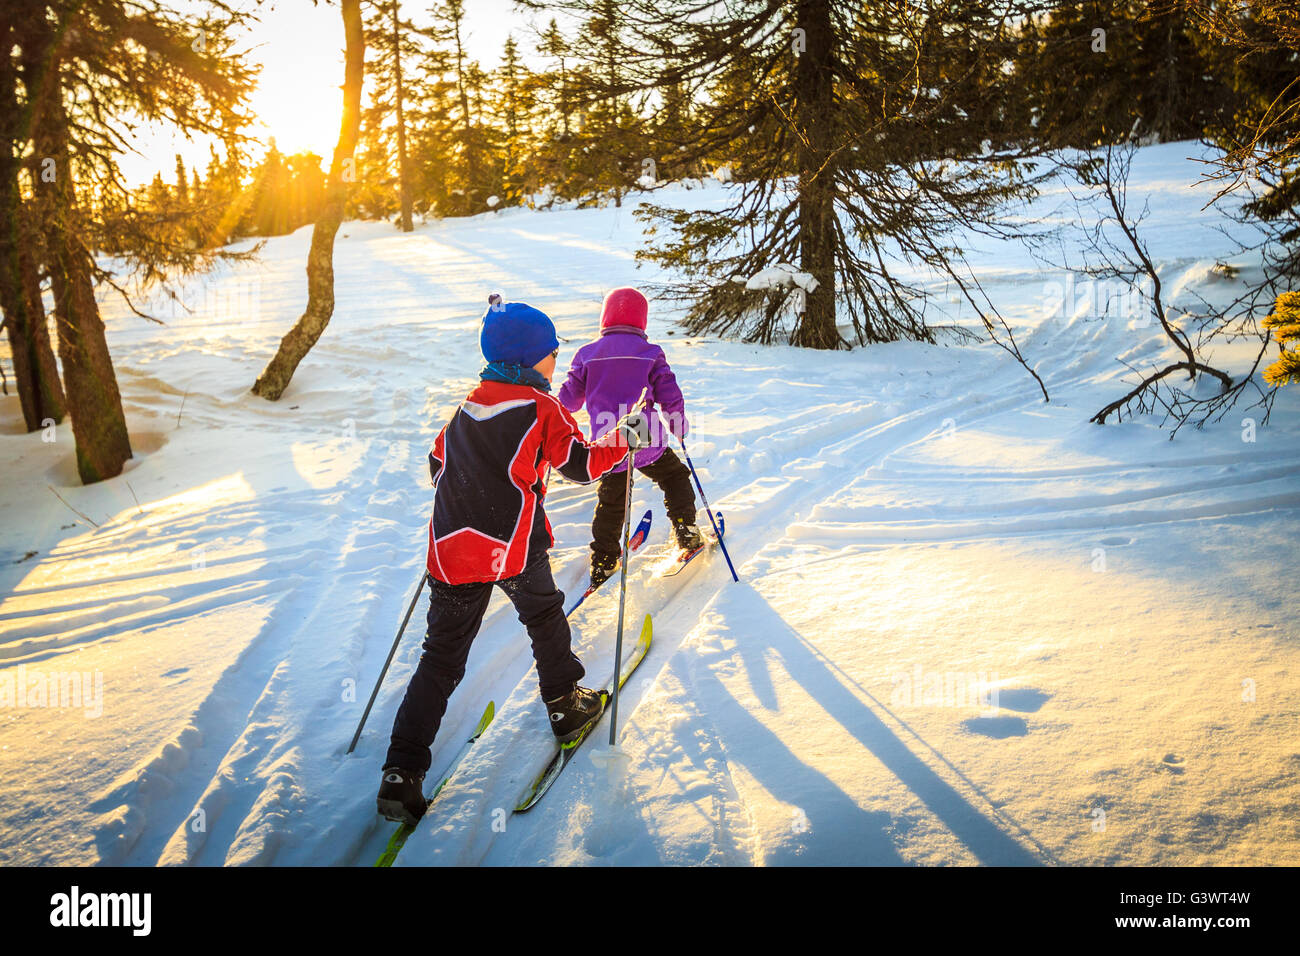 Two children, boy and girl, skiing in the forest during sunset. The sun is setting upper left in frame, creating long shadows. Stock Photo